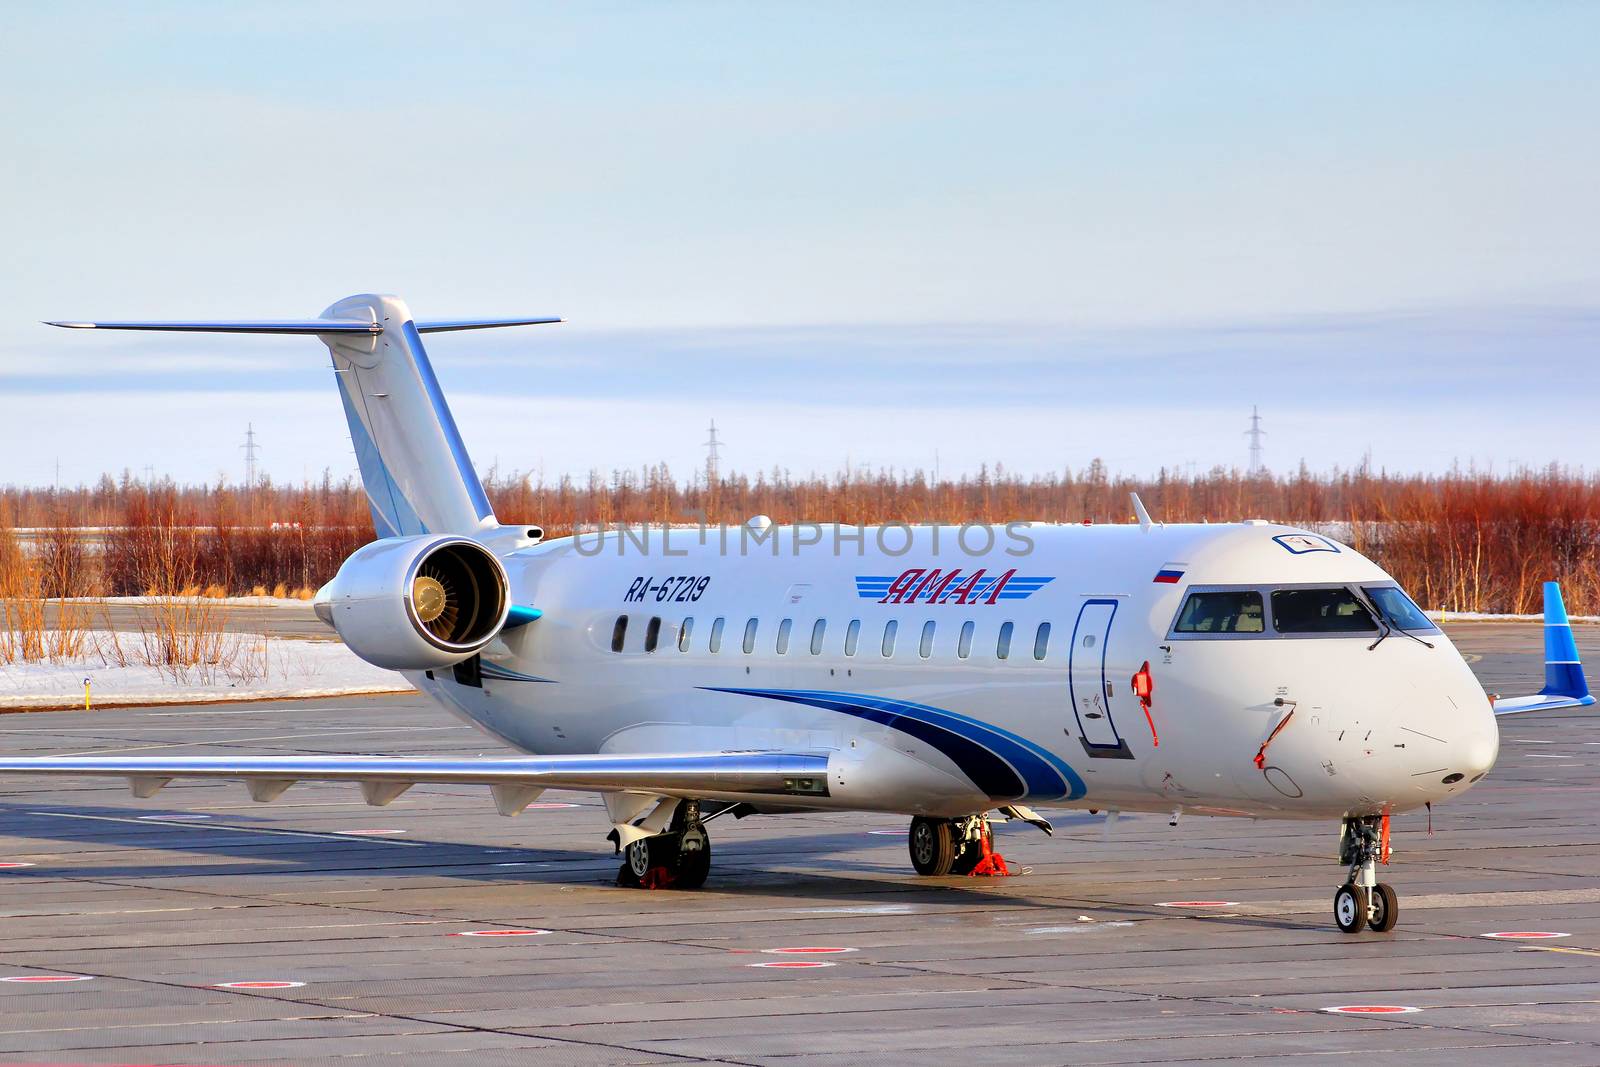 NOVYY URENGOY, RUSSIA - APRIL 27, 2013: Yamal Airlines Canadair Challenger 850 at the Novyy Urengoy International Airport.